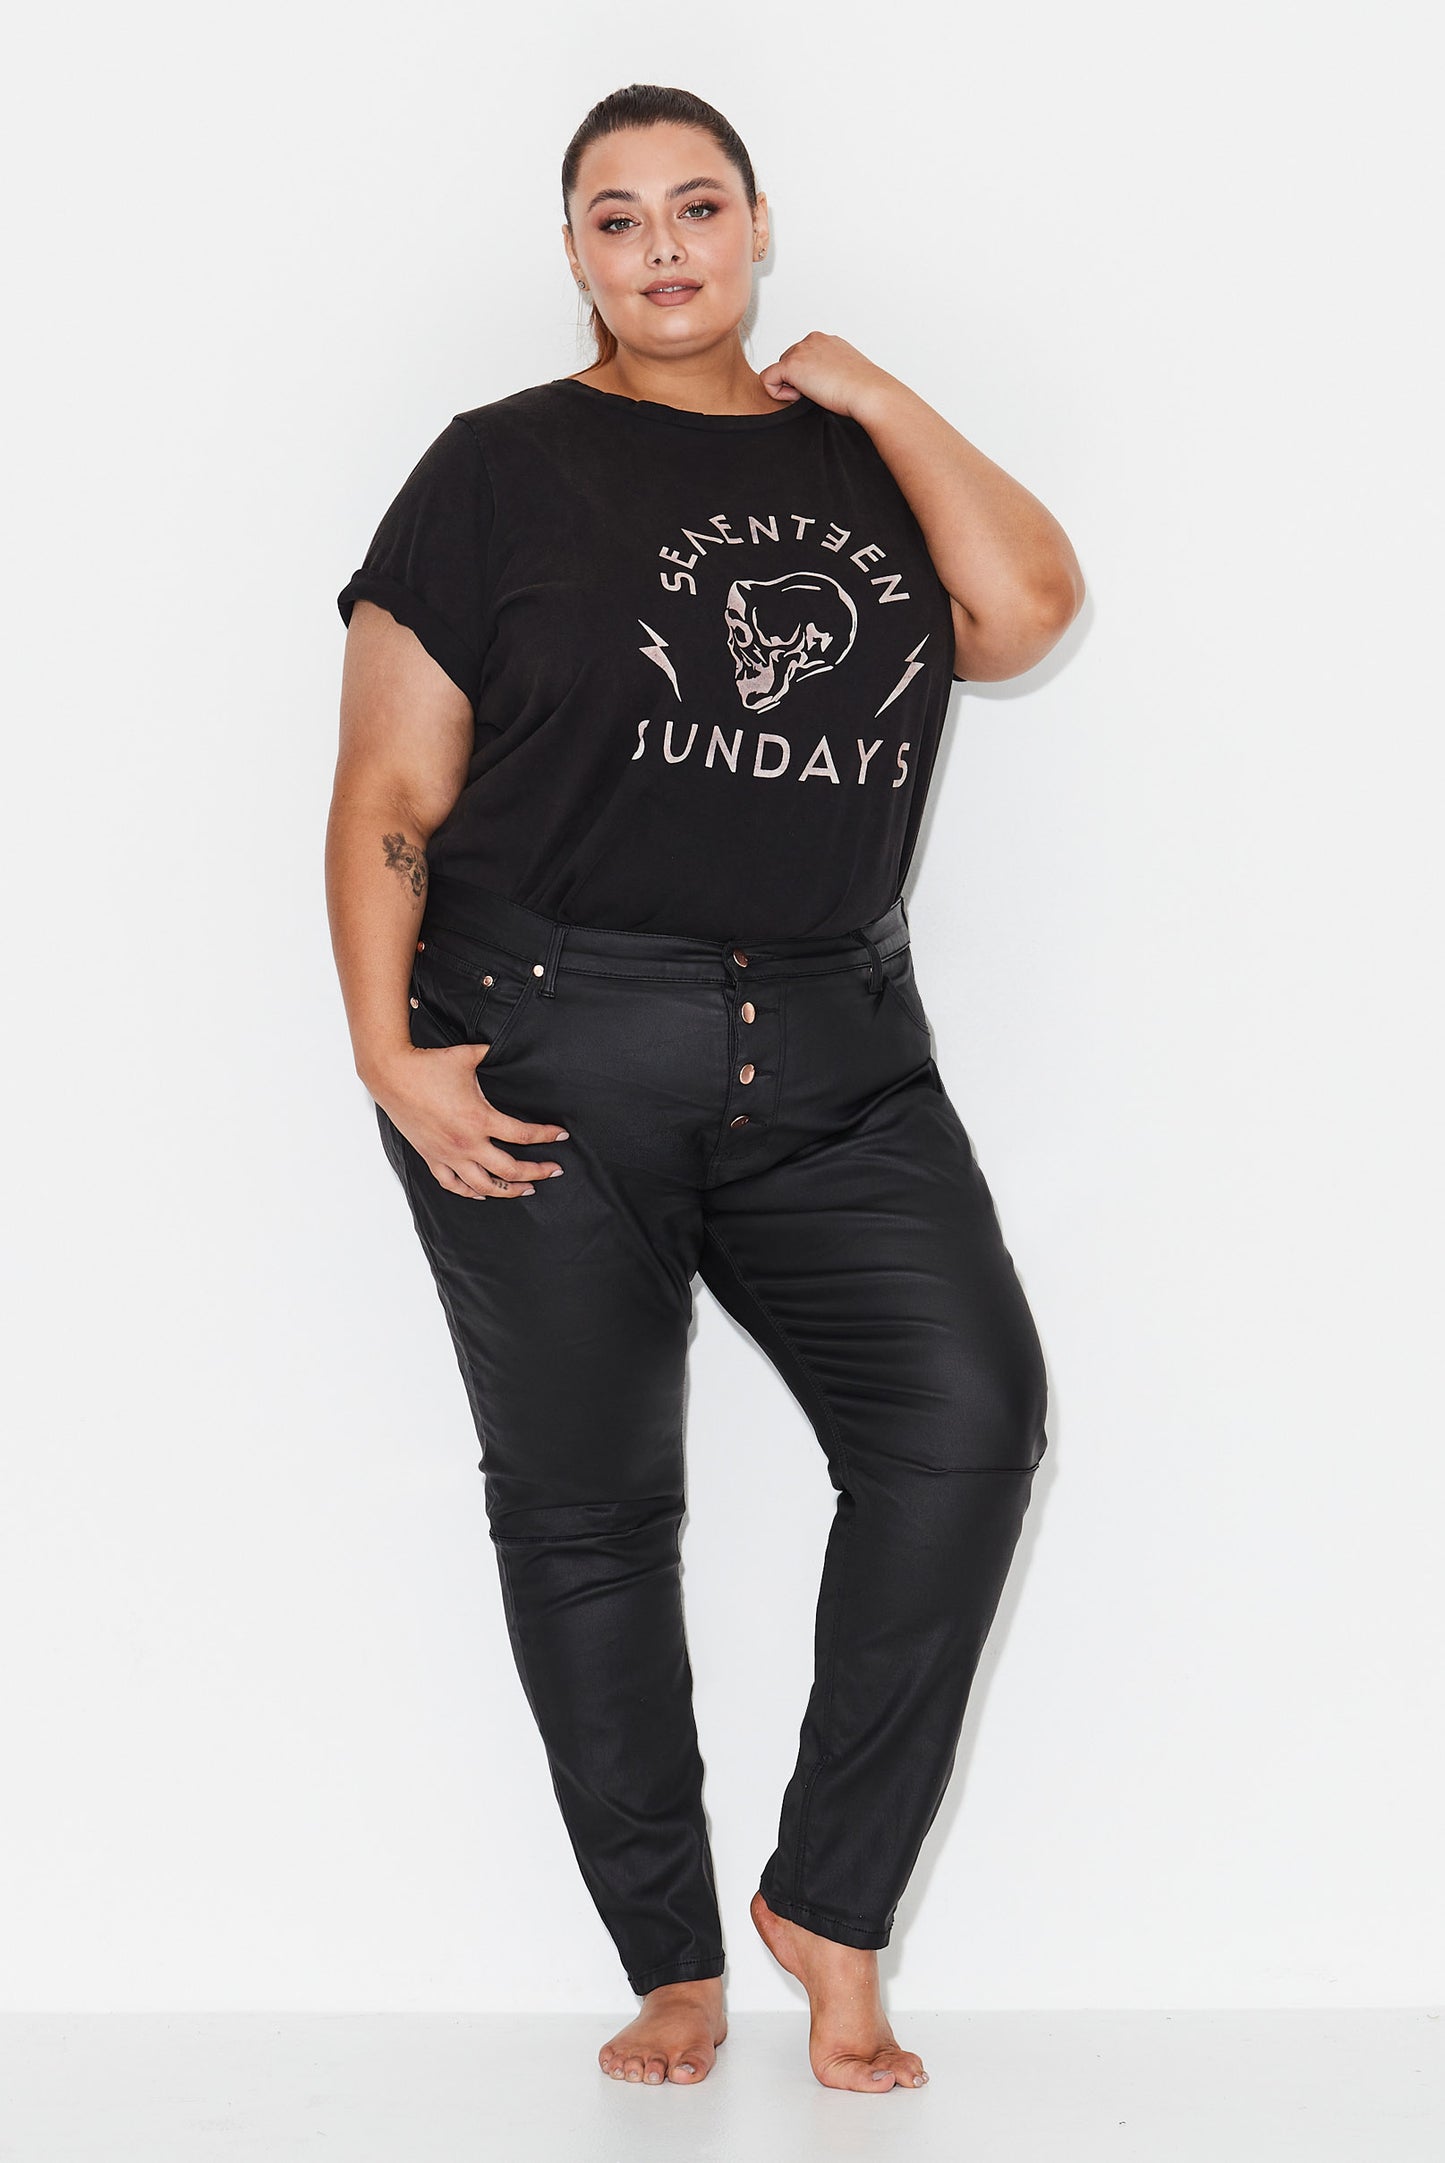 Model wears black  leather look plus size jeans with exposed button front 